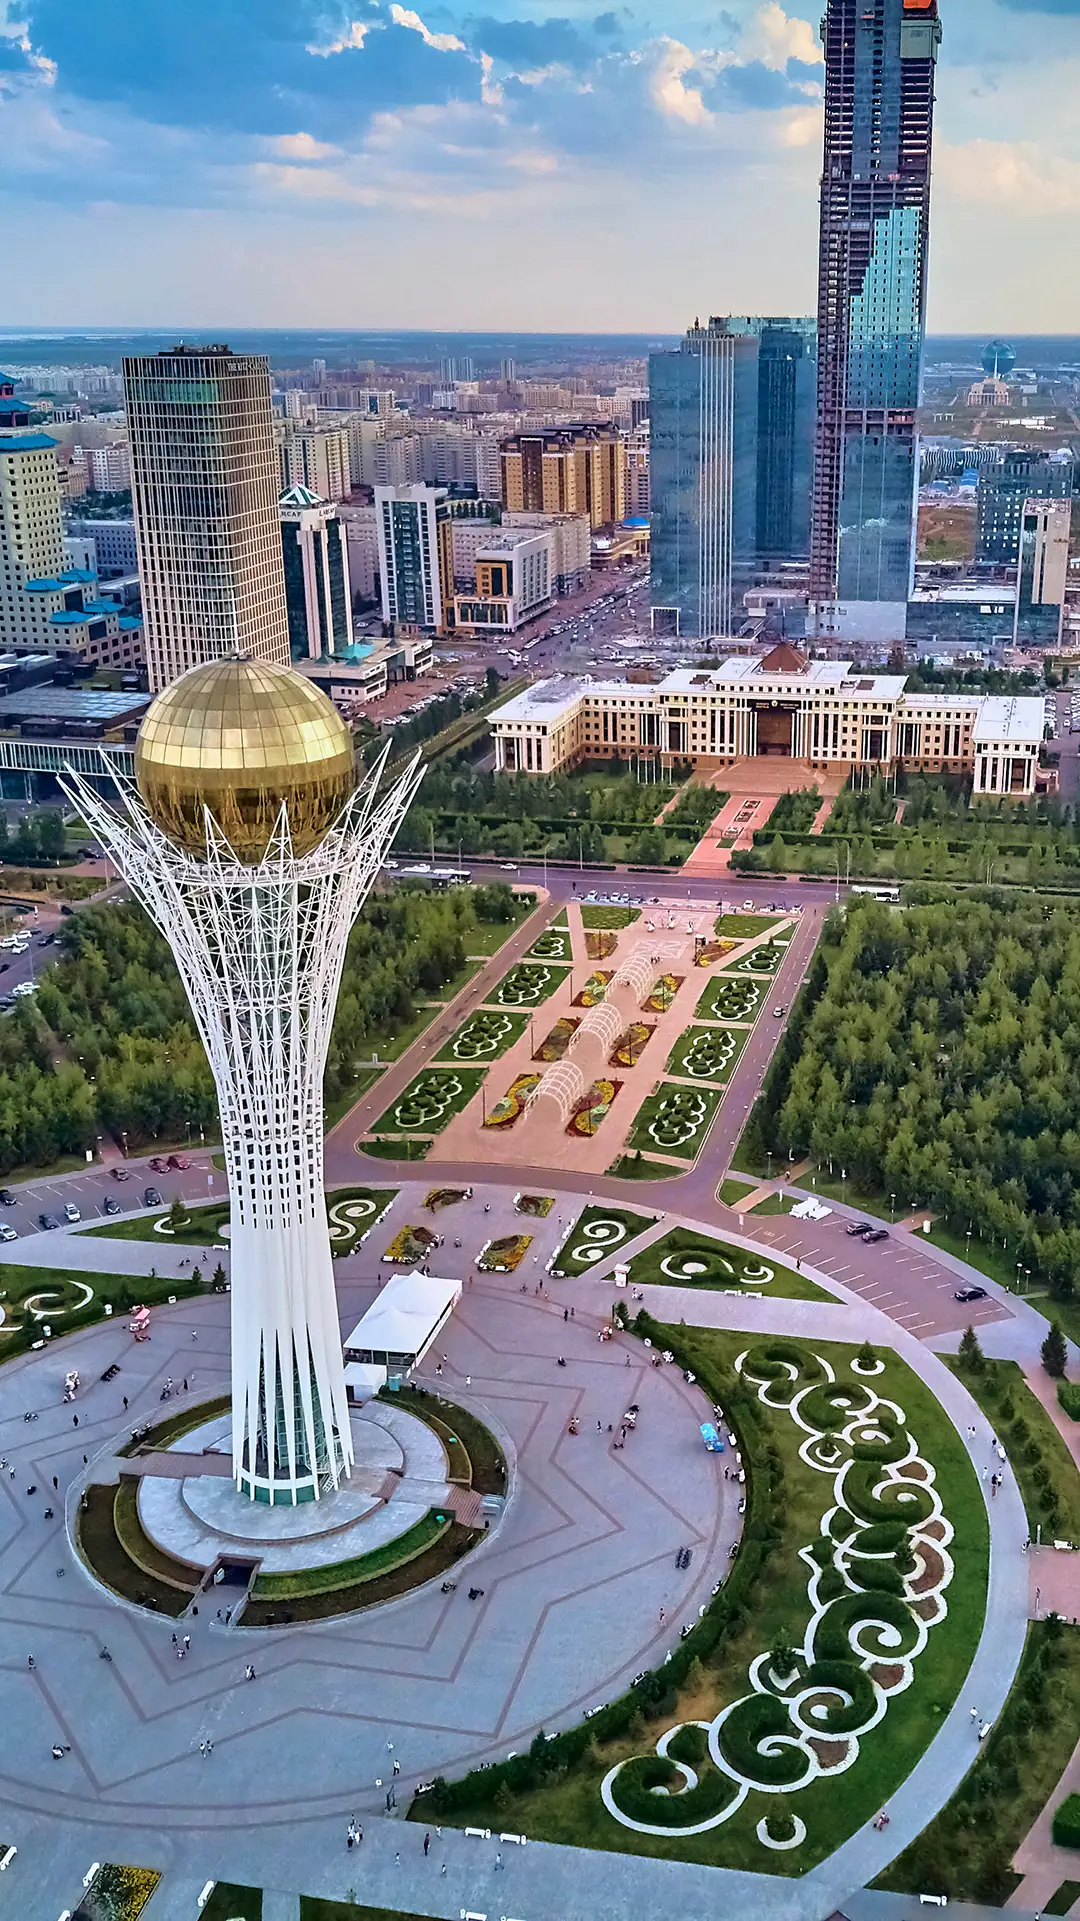 View of Nursultan (Astana) city centre with skyscrapers and Baiterek Tower.